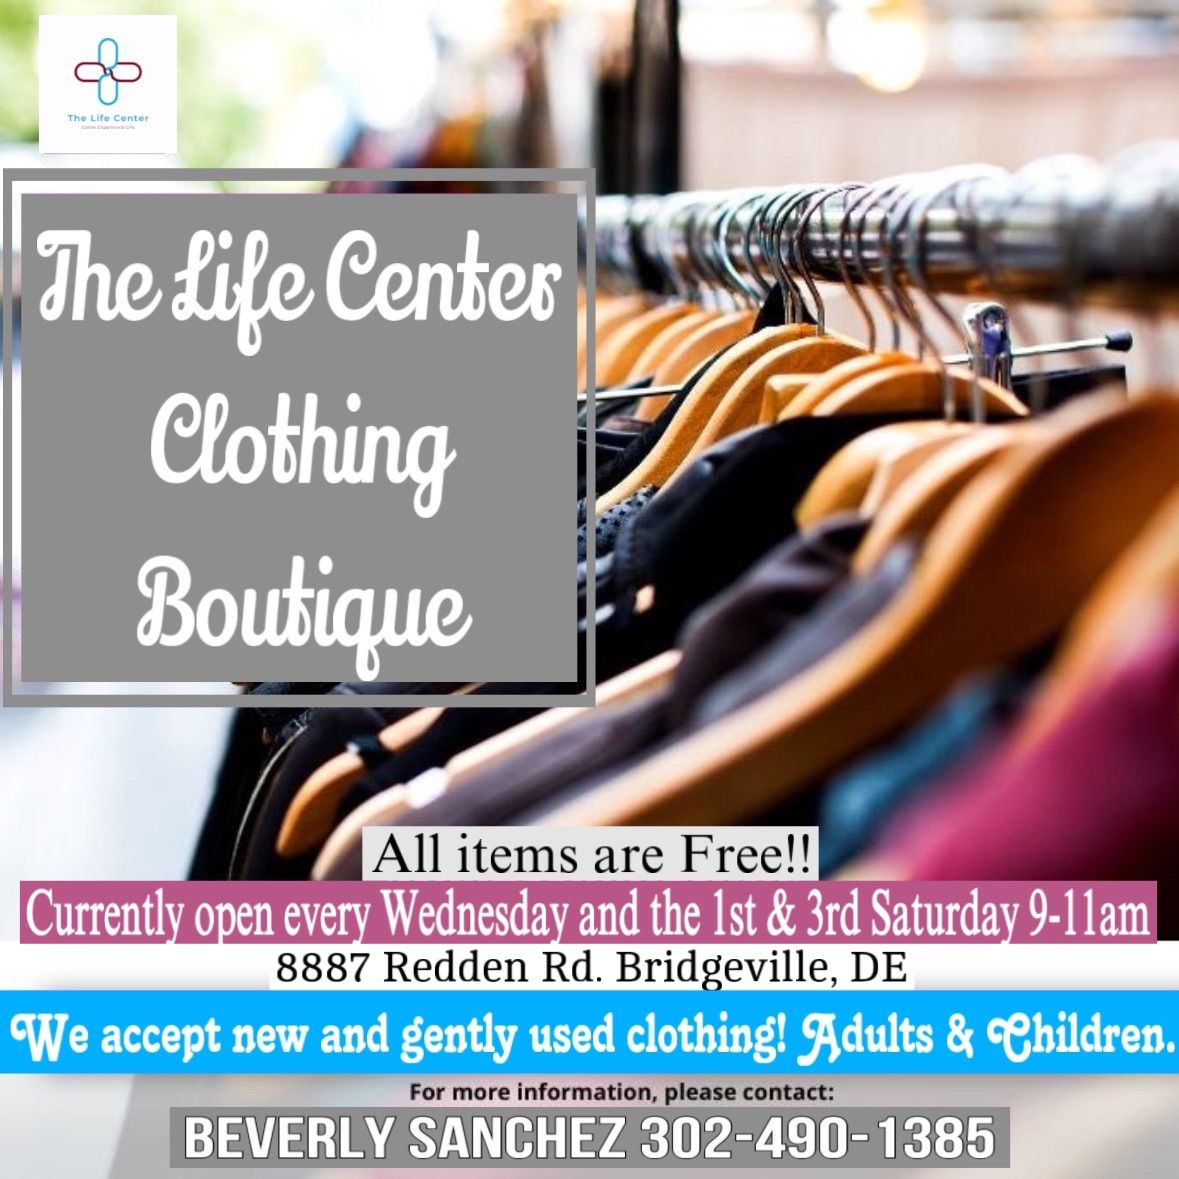 FREE Clothing Boutique Open!